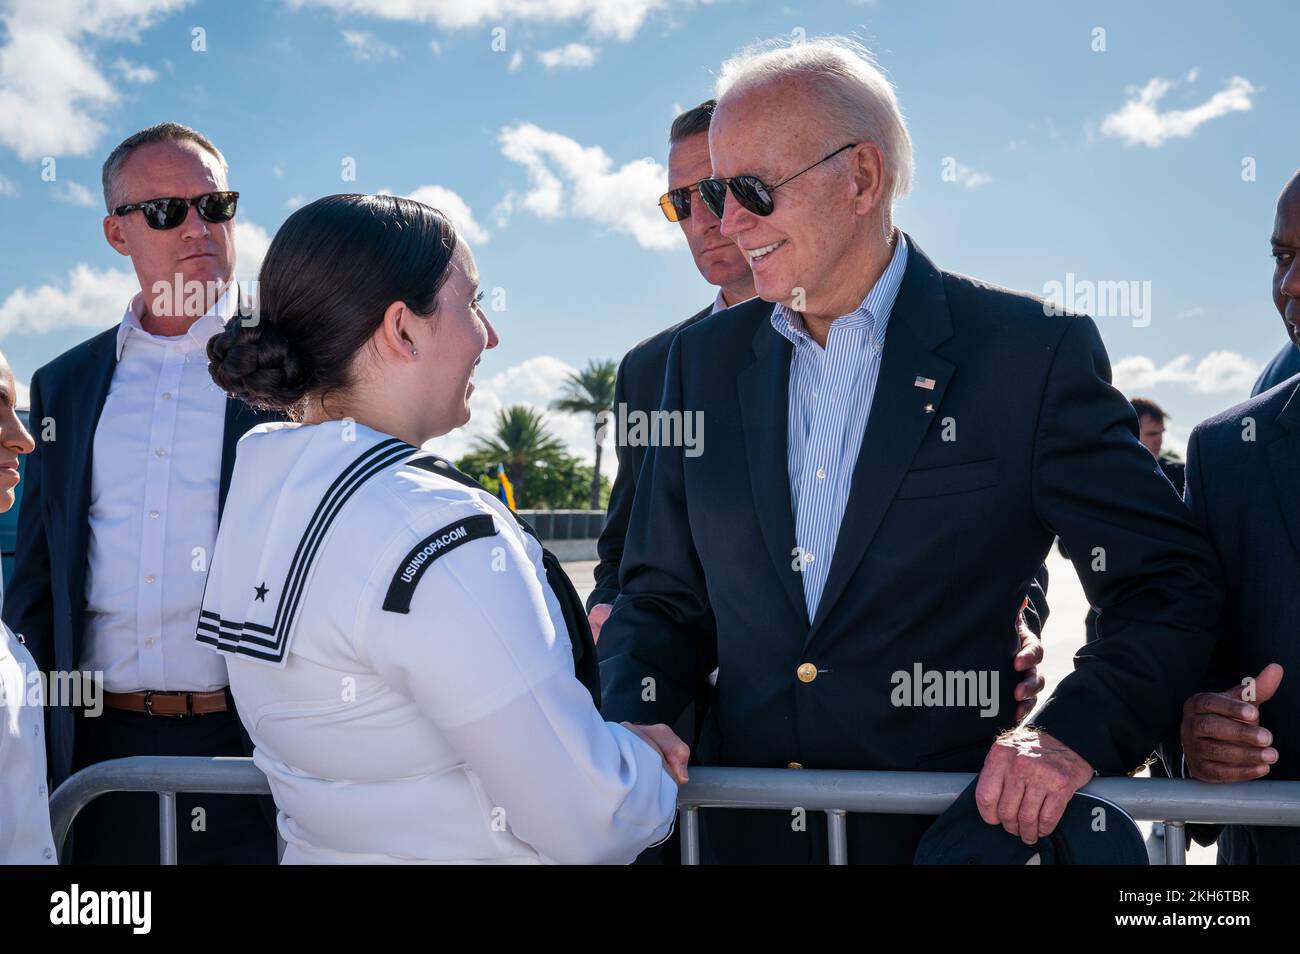 Honolulu, United States. 16 November, 2022. U.S. President Joe Biden greets service members during a stop-over on his way home from the G20 Summit meeting in Indonesia at Joint Base Pearl Harbor-Hickam, November 16, 2022 in Honolulu, Hawaii.  Credit: MC1 Anthony J. Rivera/U.S. Navy Photo/Alamy Live News Stock Photo